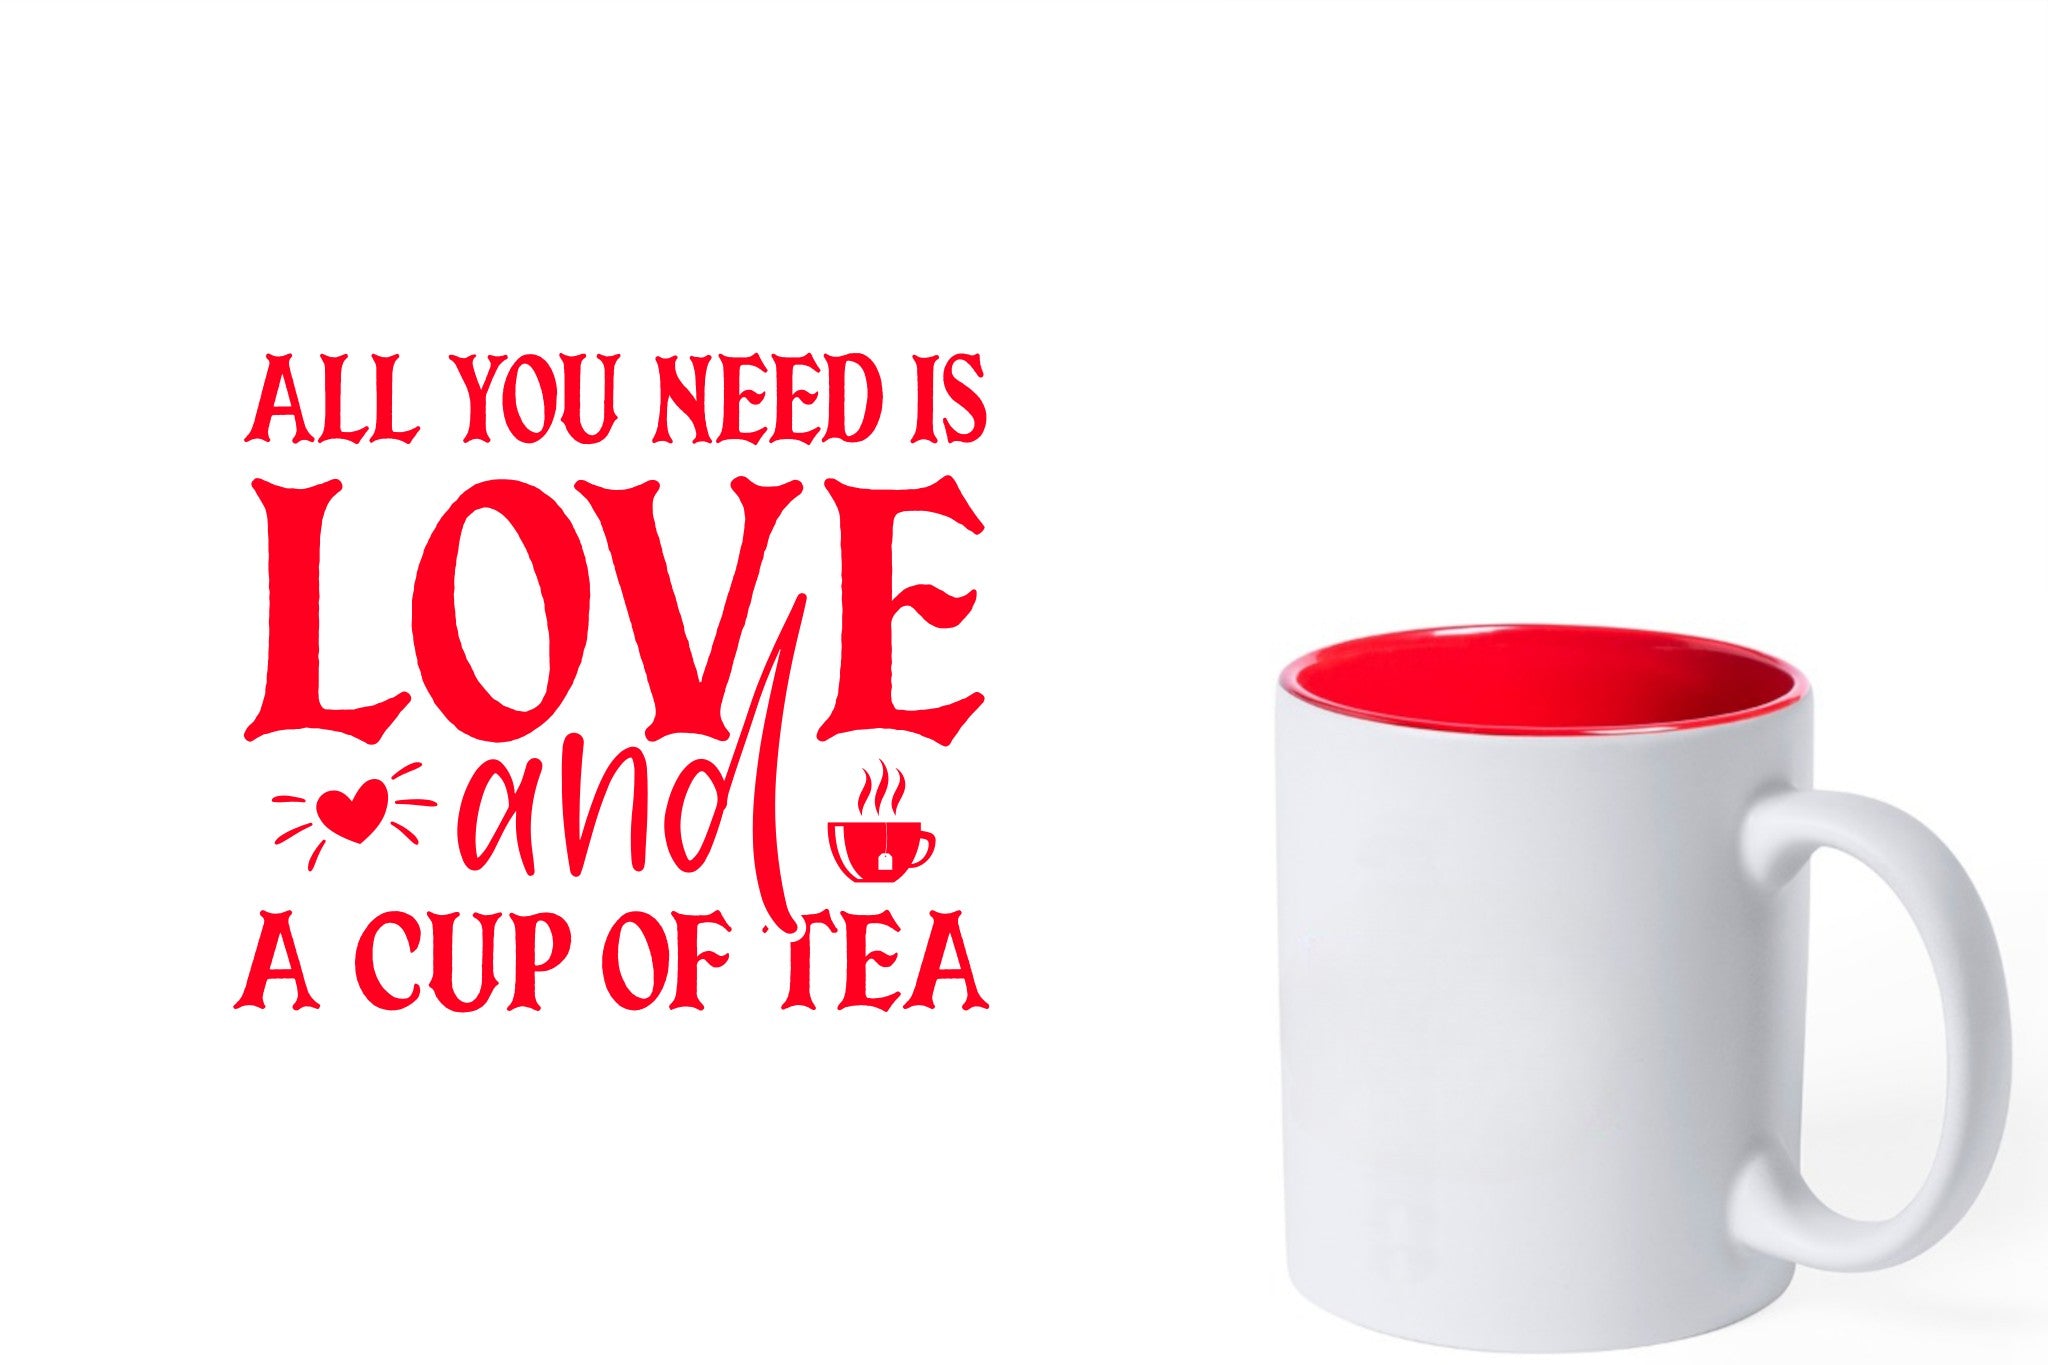 witte keramische mok met rode gravure  'All you need is love and a cup of tea'.